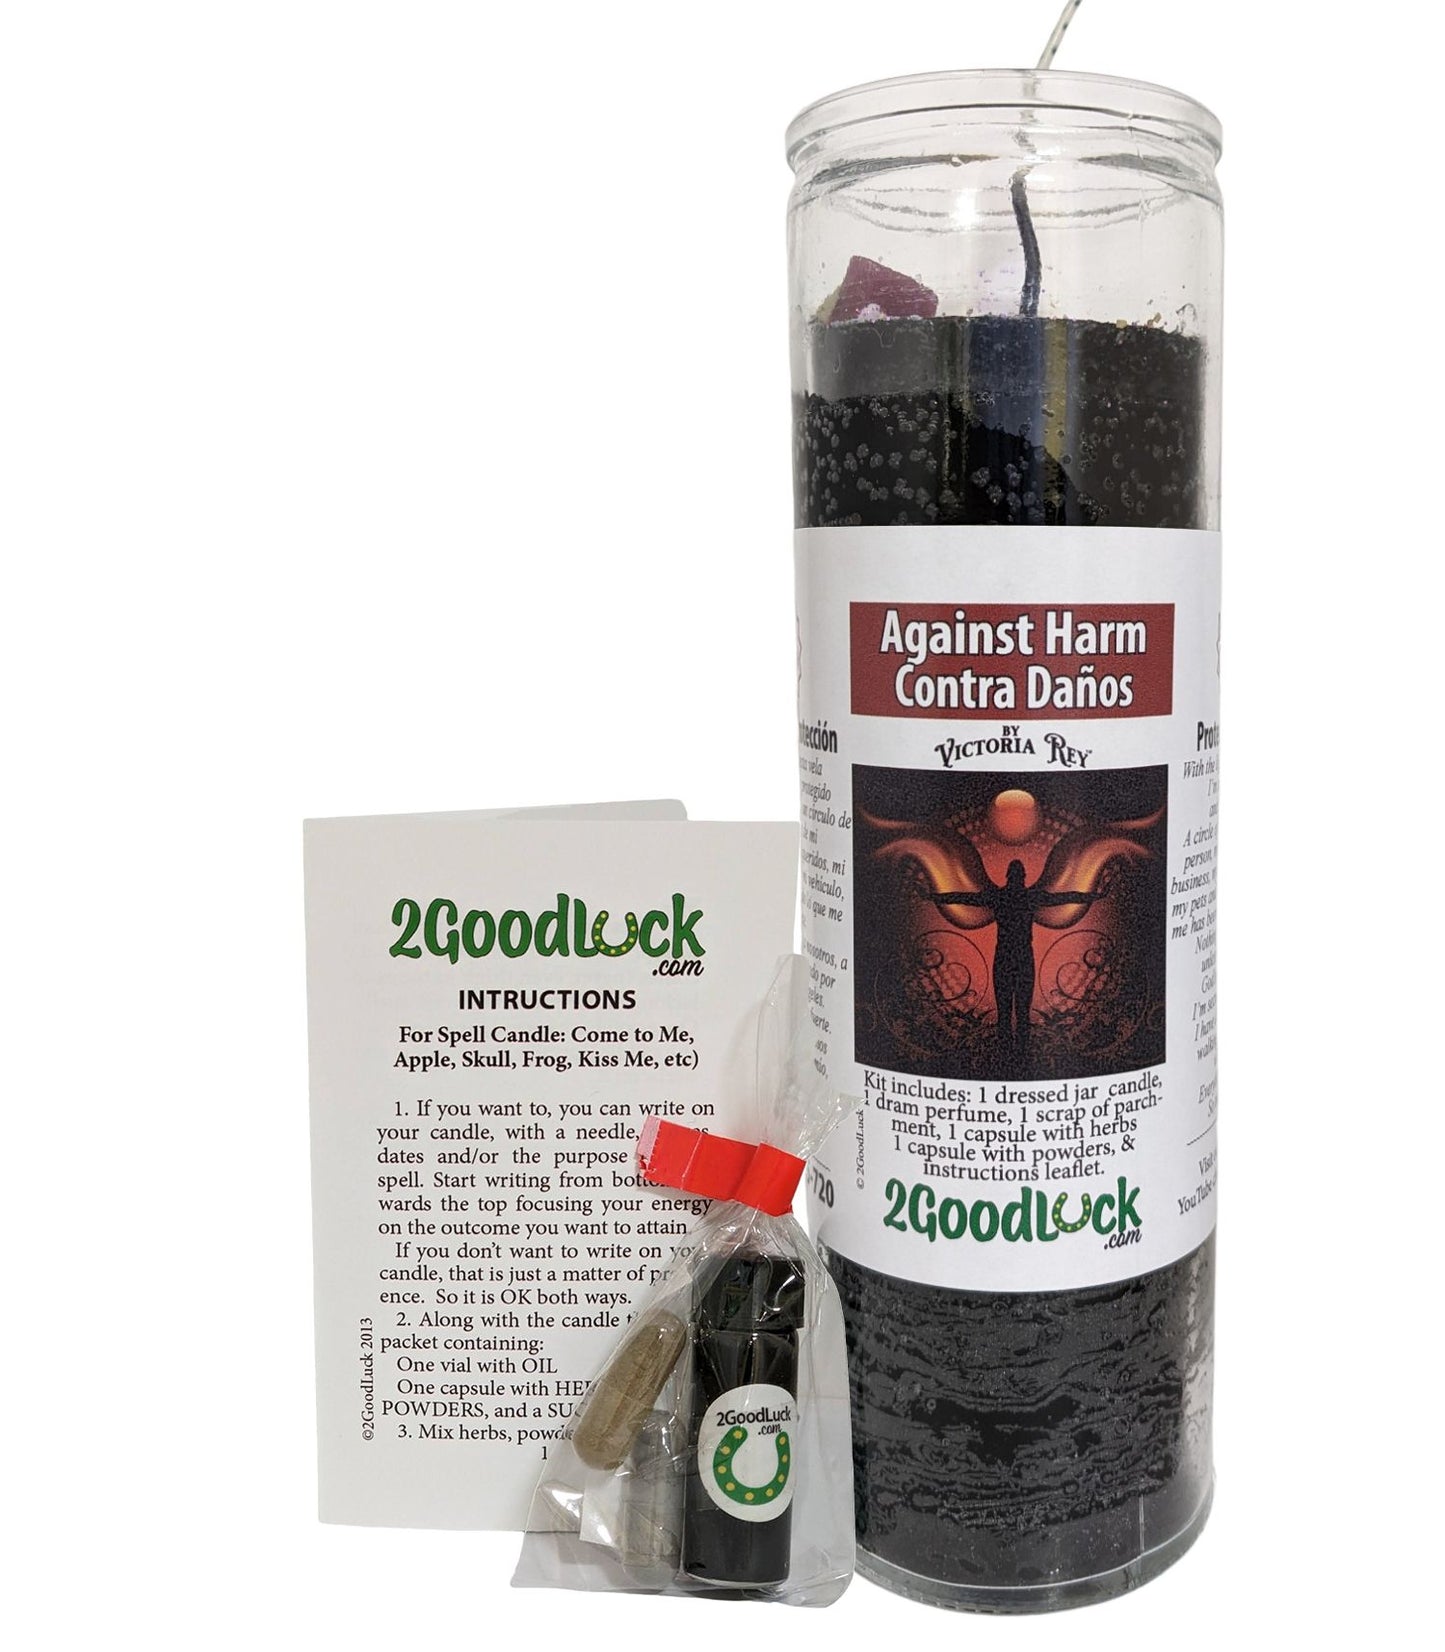 Against Harm Dressed Candle Kit - Contra Daños